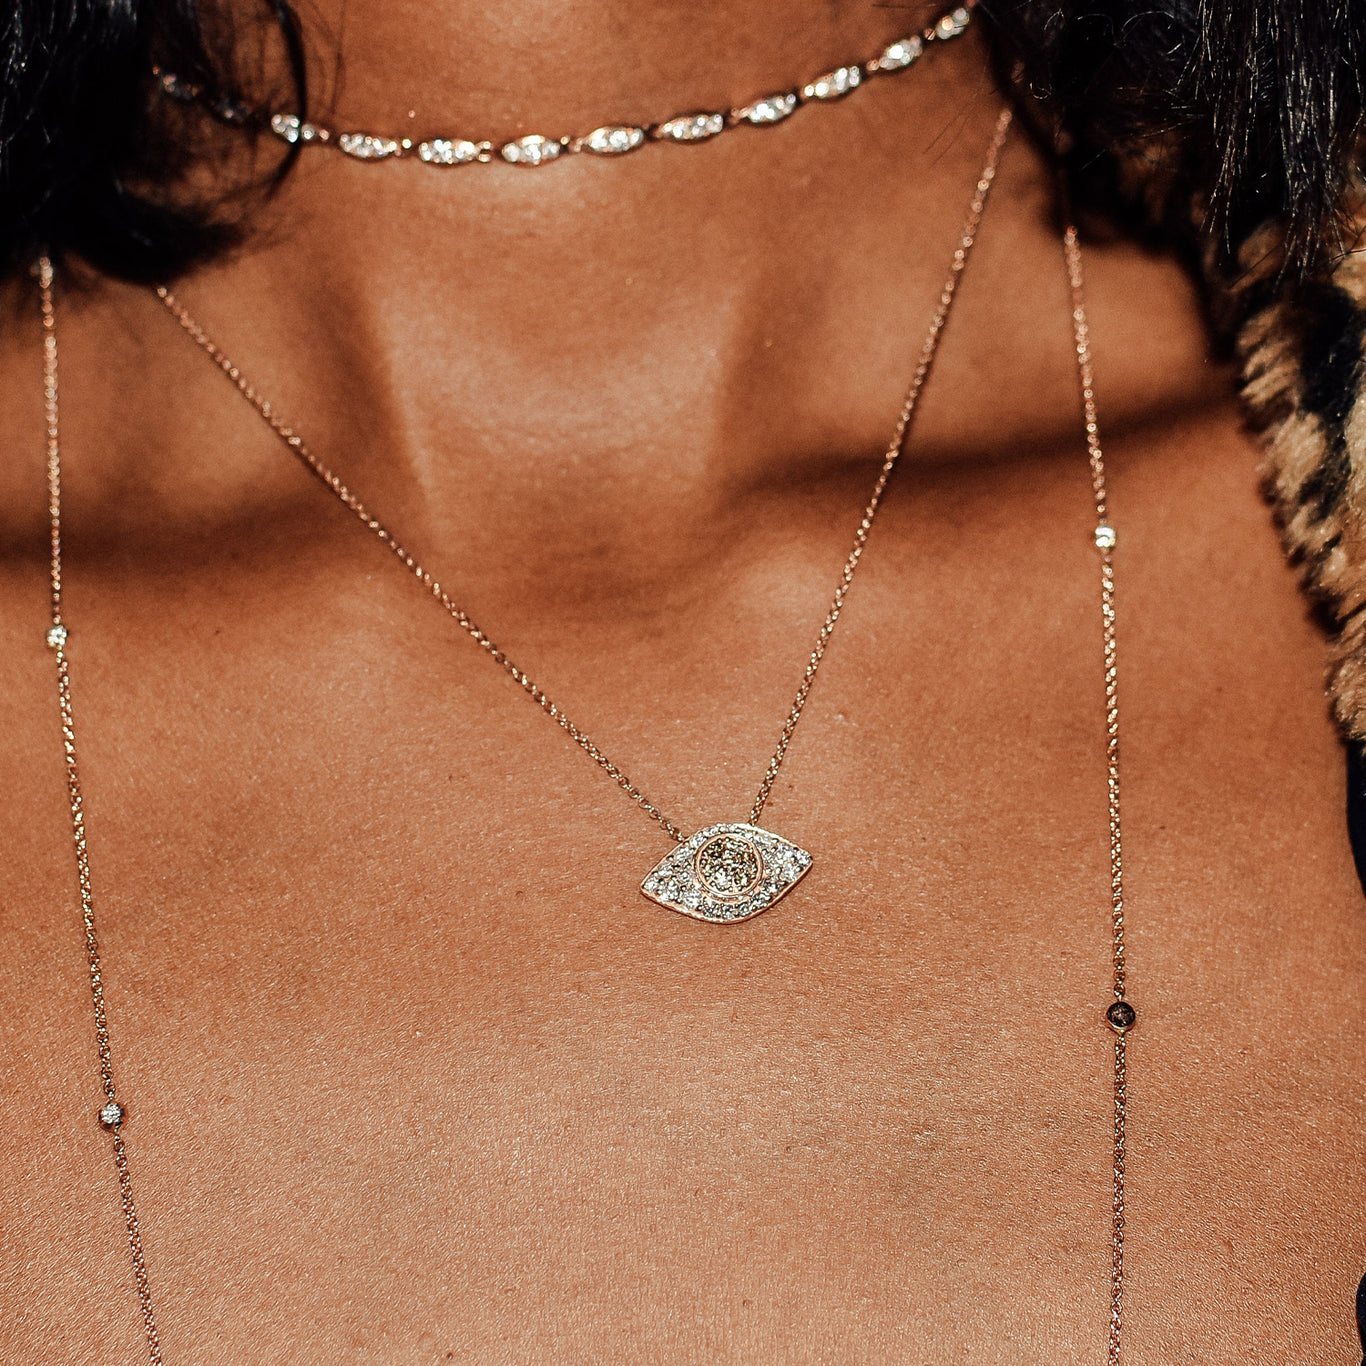 The Drishti Necklace shown with our stunning Angel Choker.